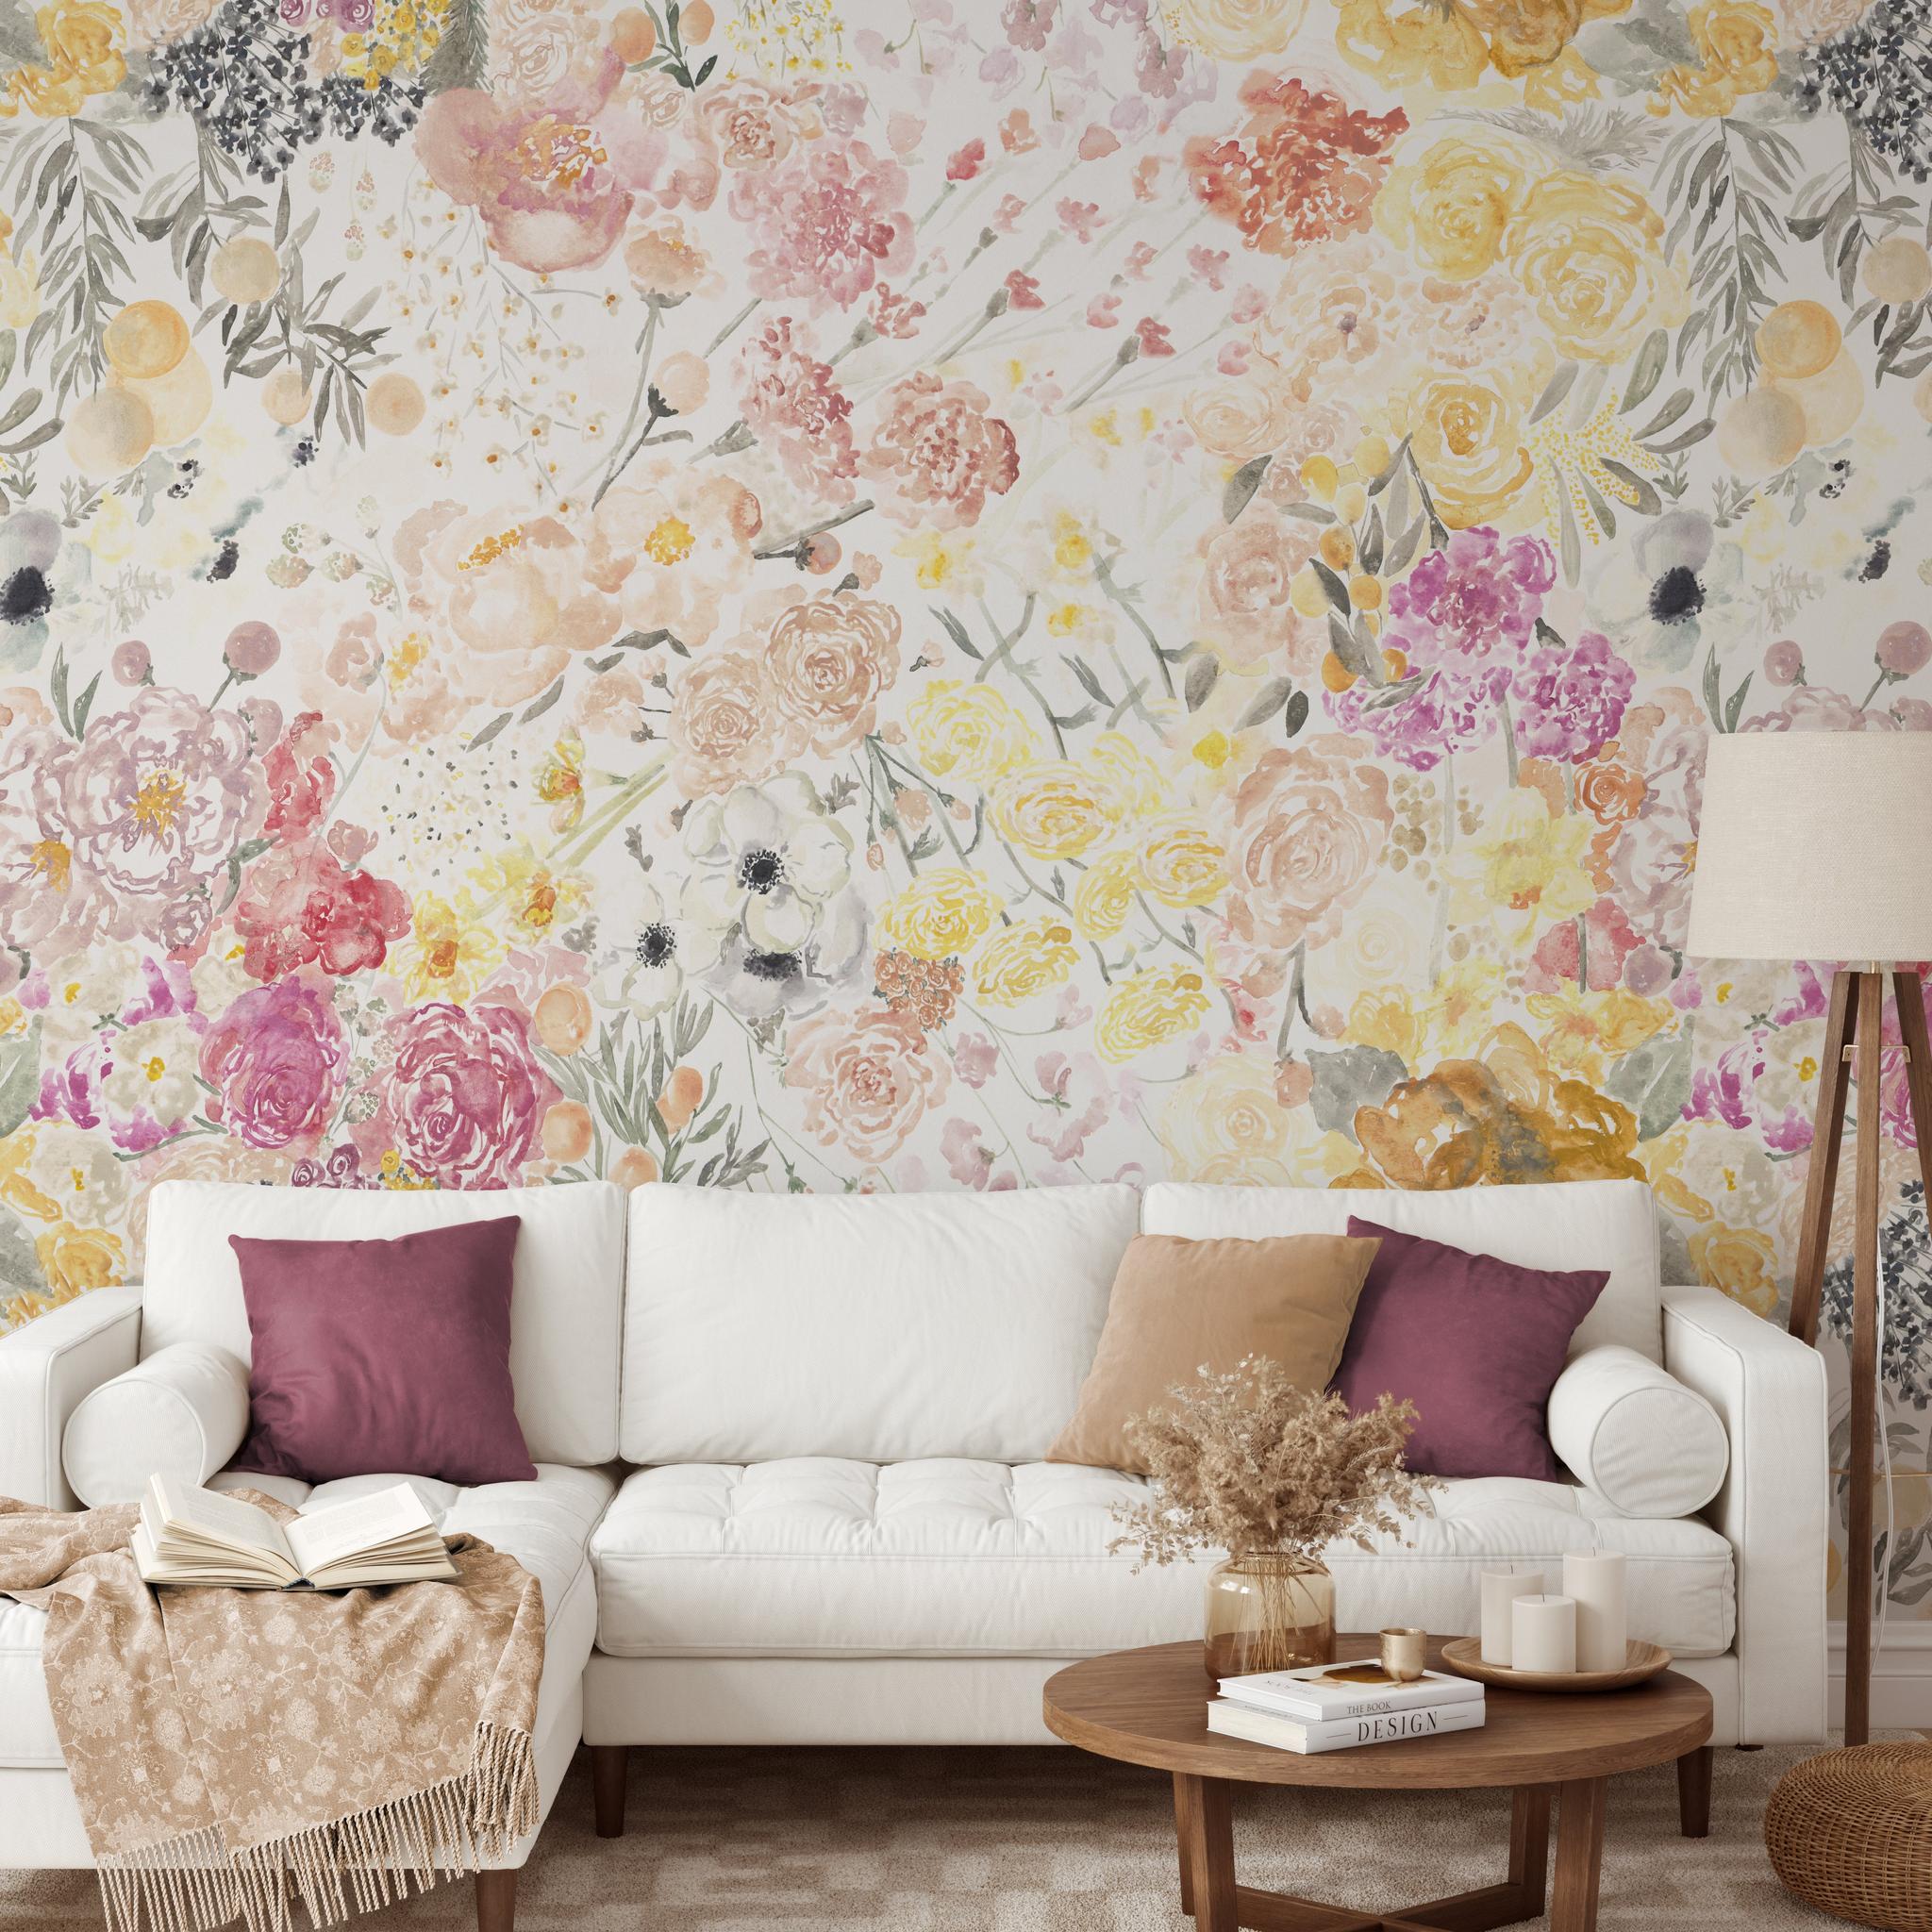 "Spring Fling Wallpaper by Wall Blush adorns living room with floral design, highlighting elegance and style."